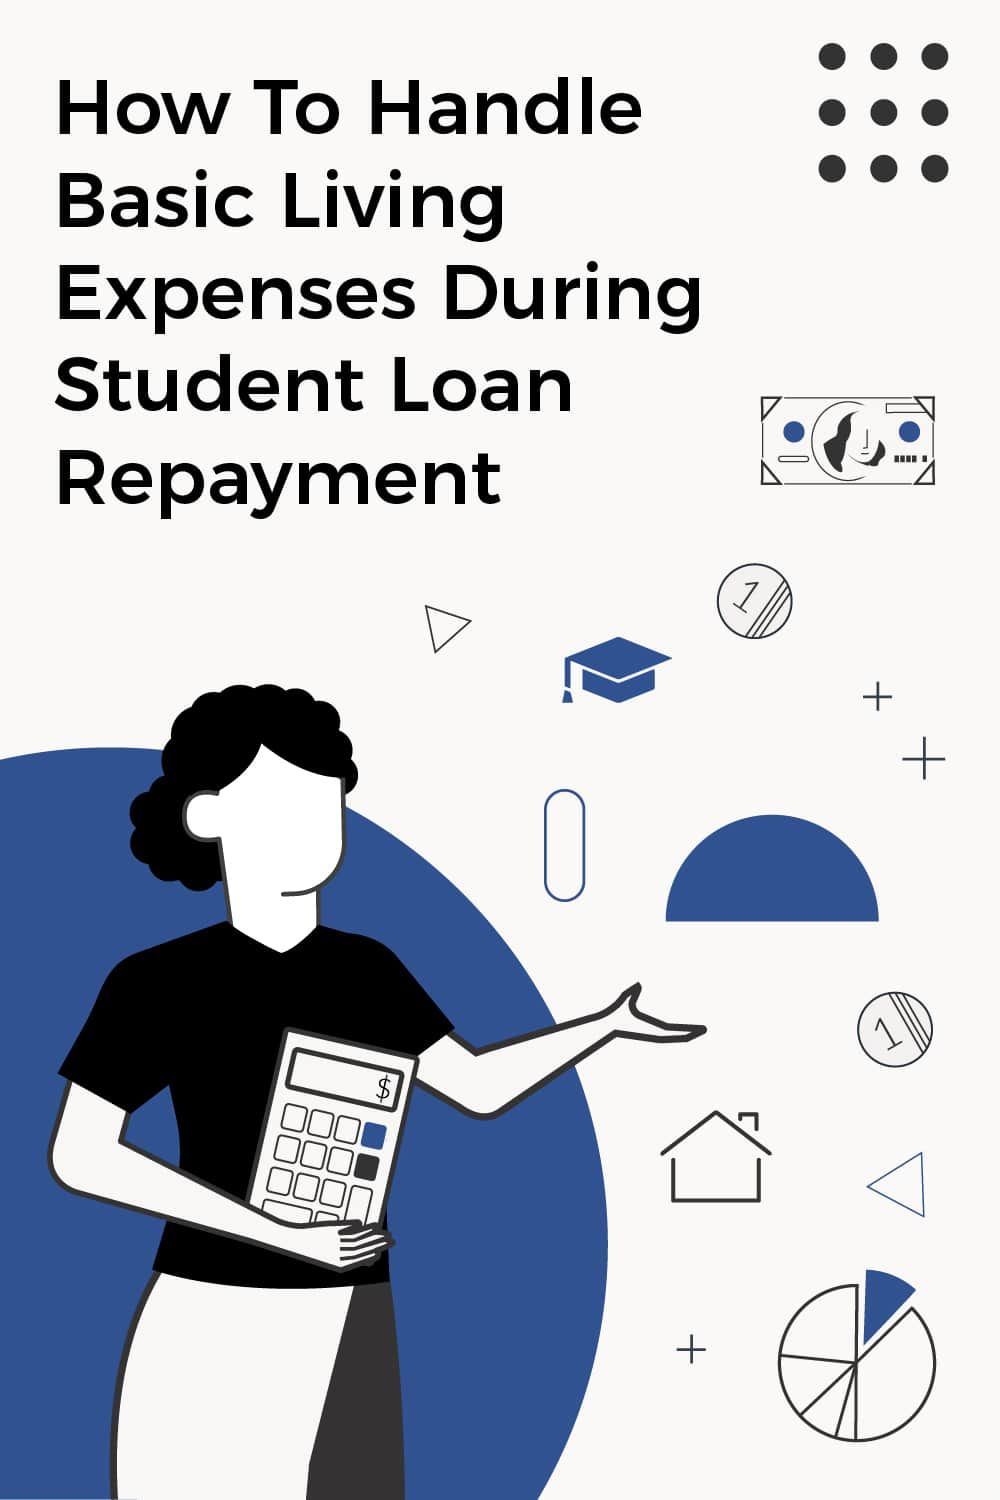 How To Handle Basic Living Expenses During Student Loan Repayment